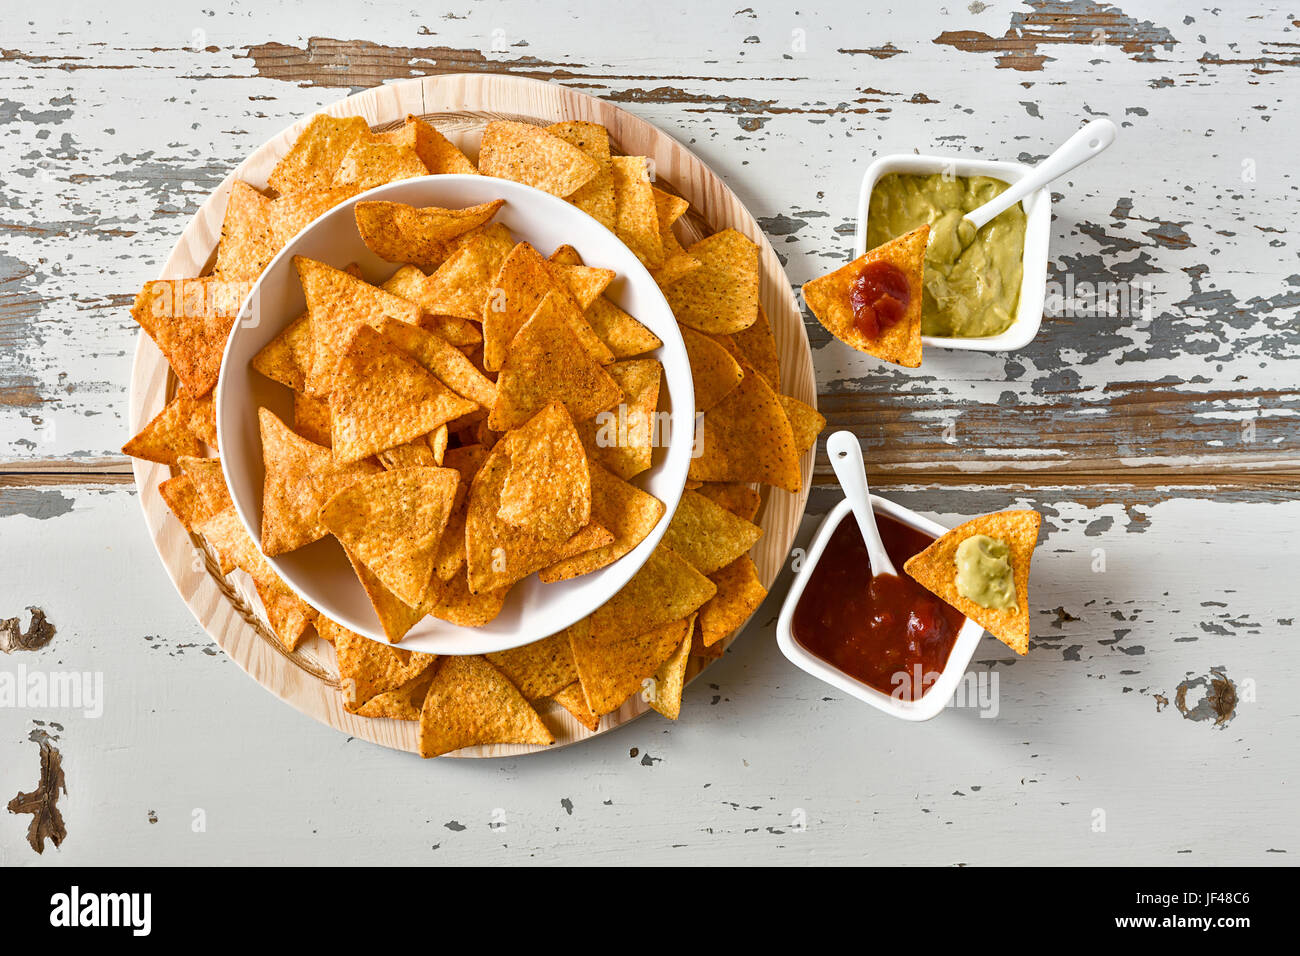 Nachos in a white bowl and sauces Stock Photo